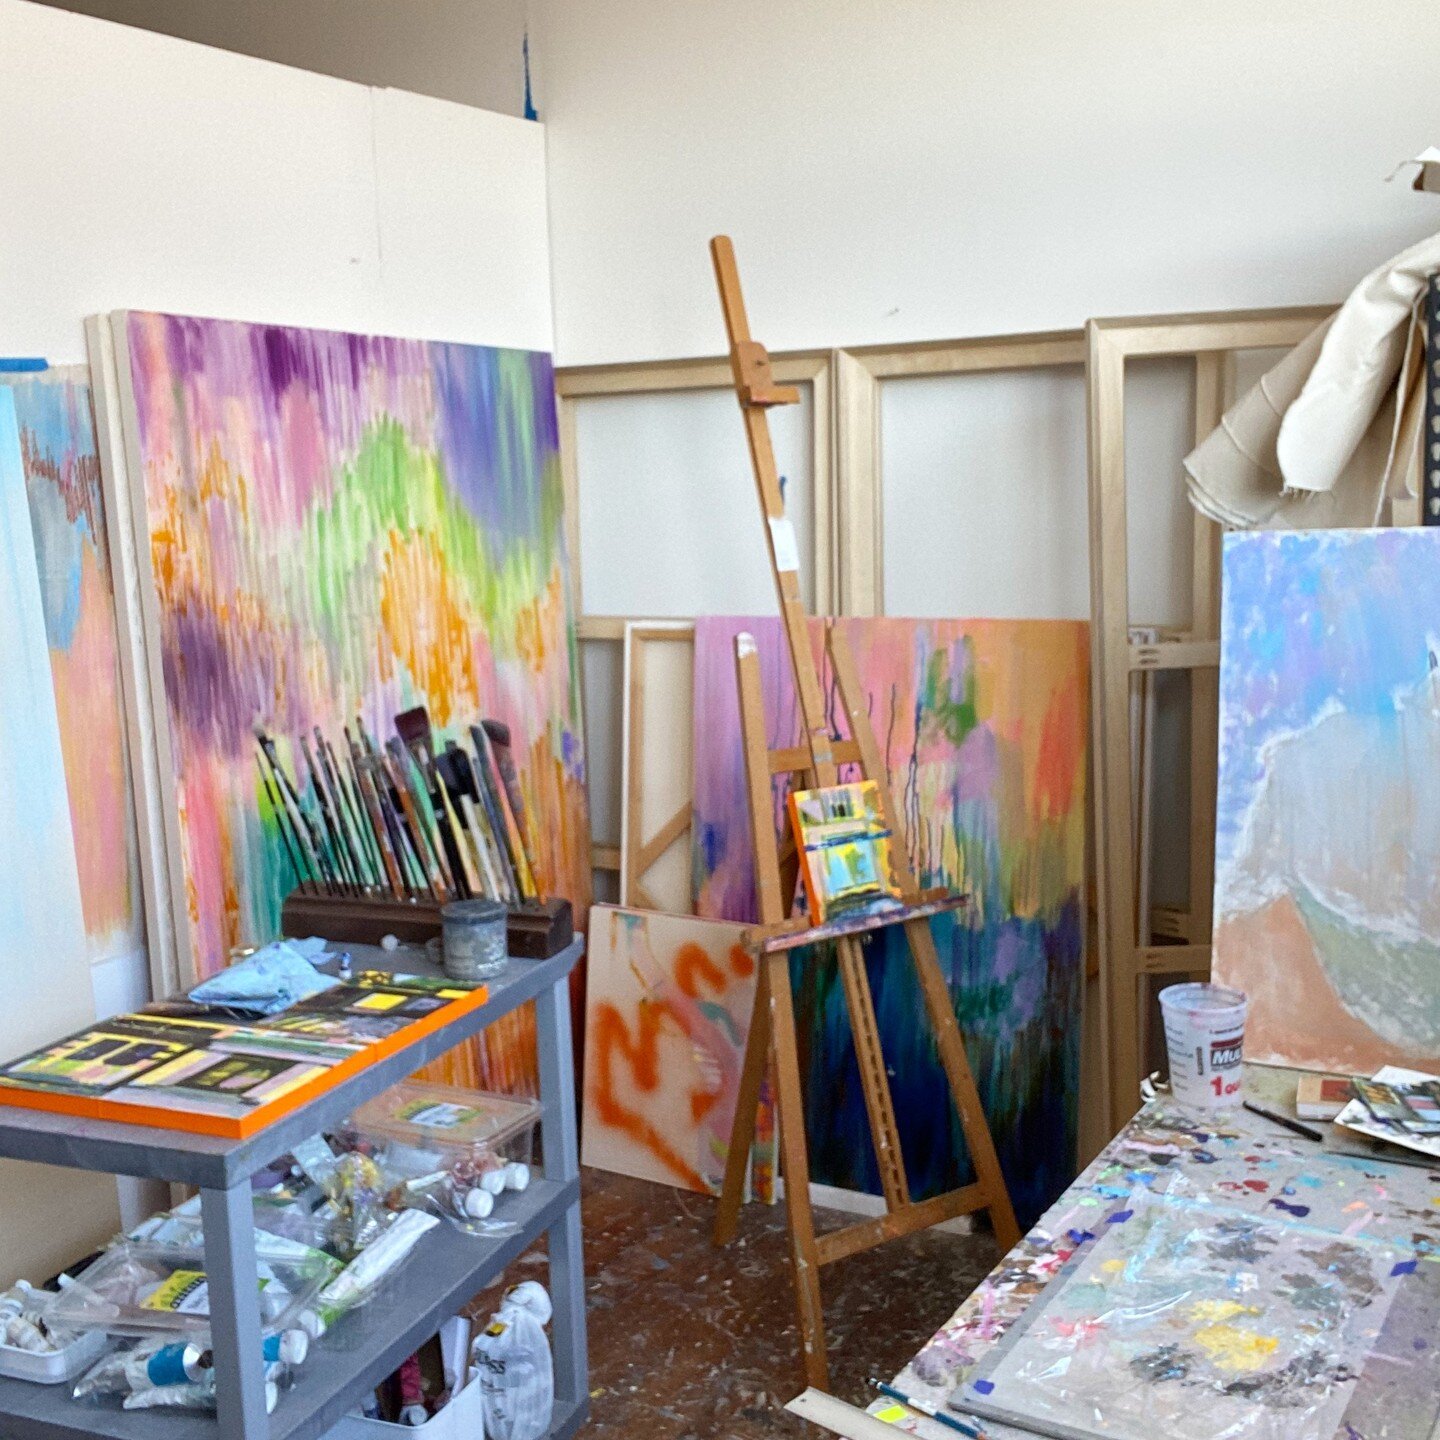 Now a view of my actual studio when I wasn't taking over the empty space next to mine..